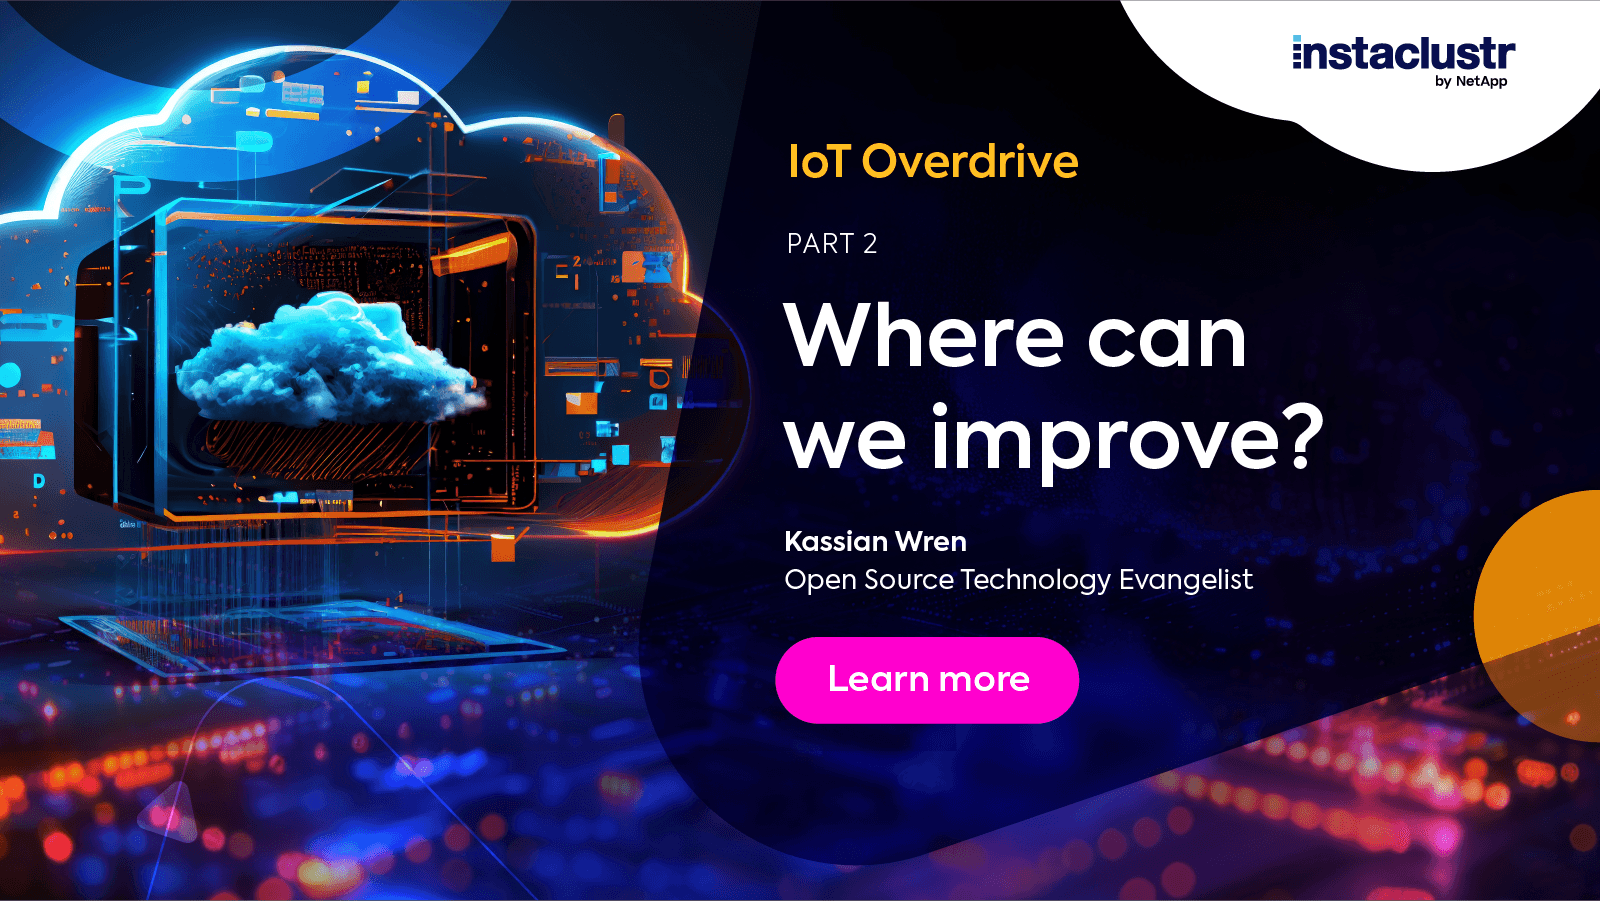 IoT Overdrive Part 2: Where Can We Improve?